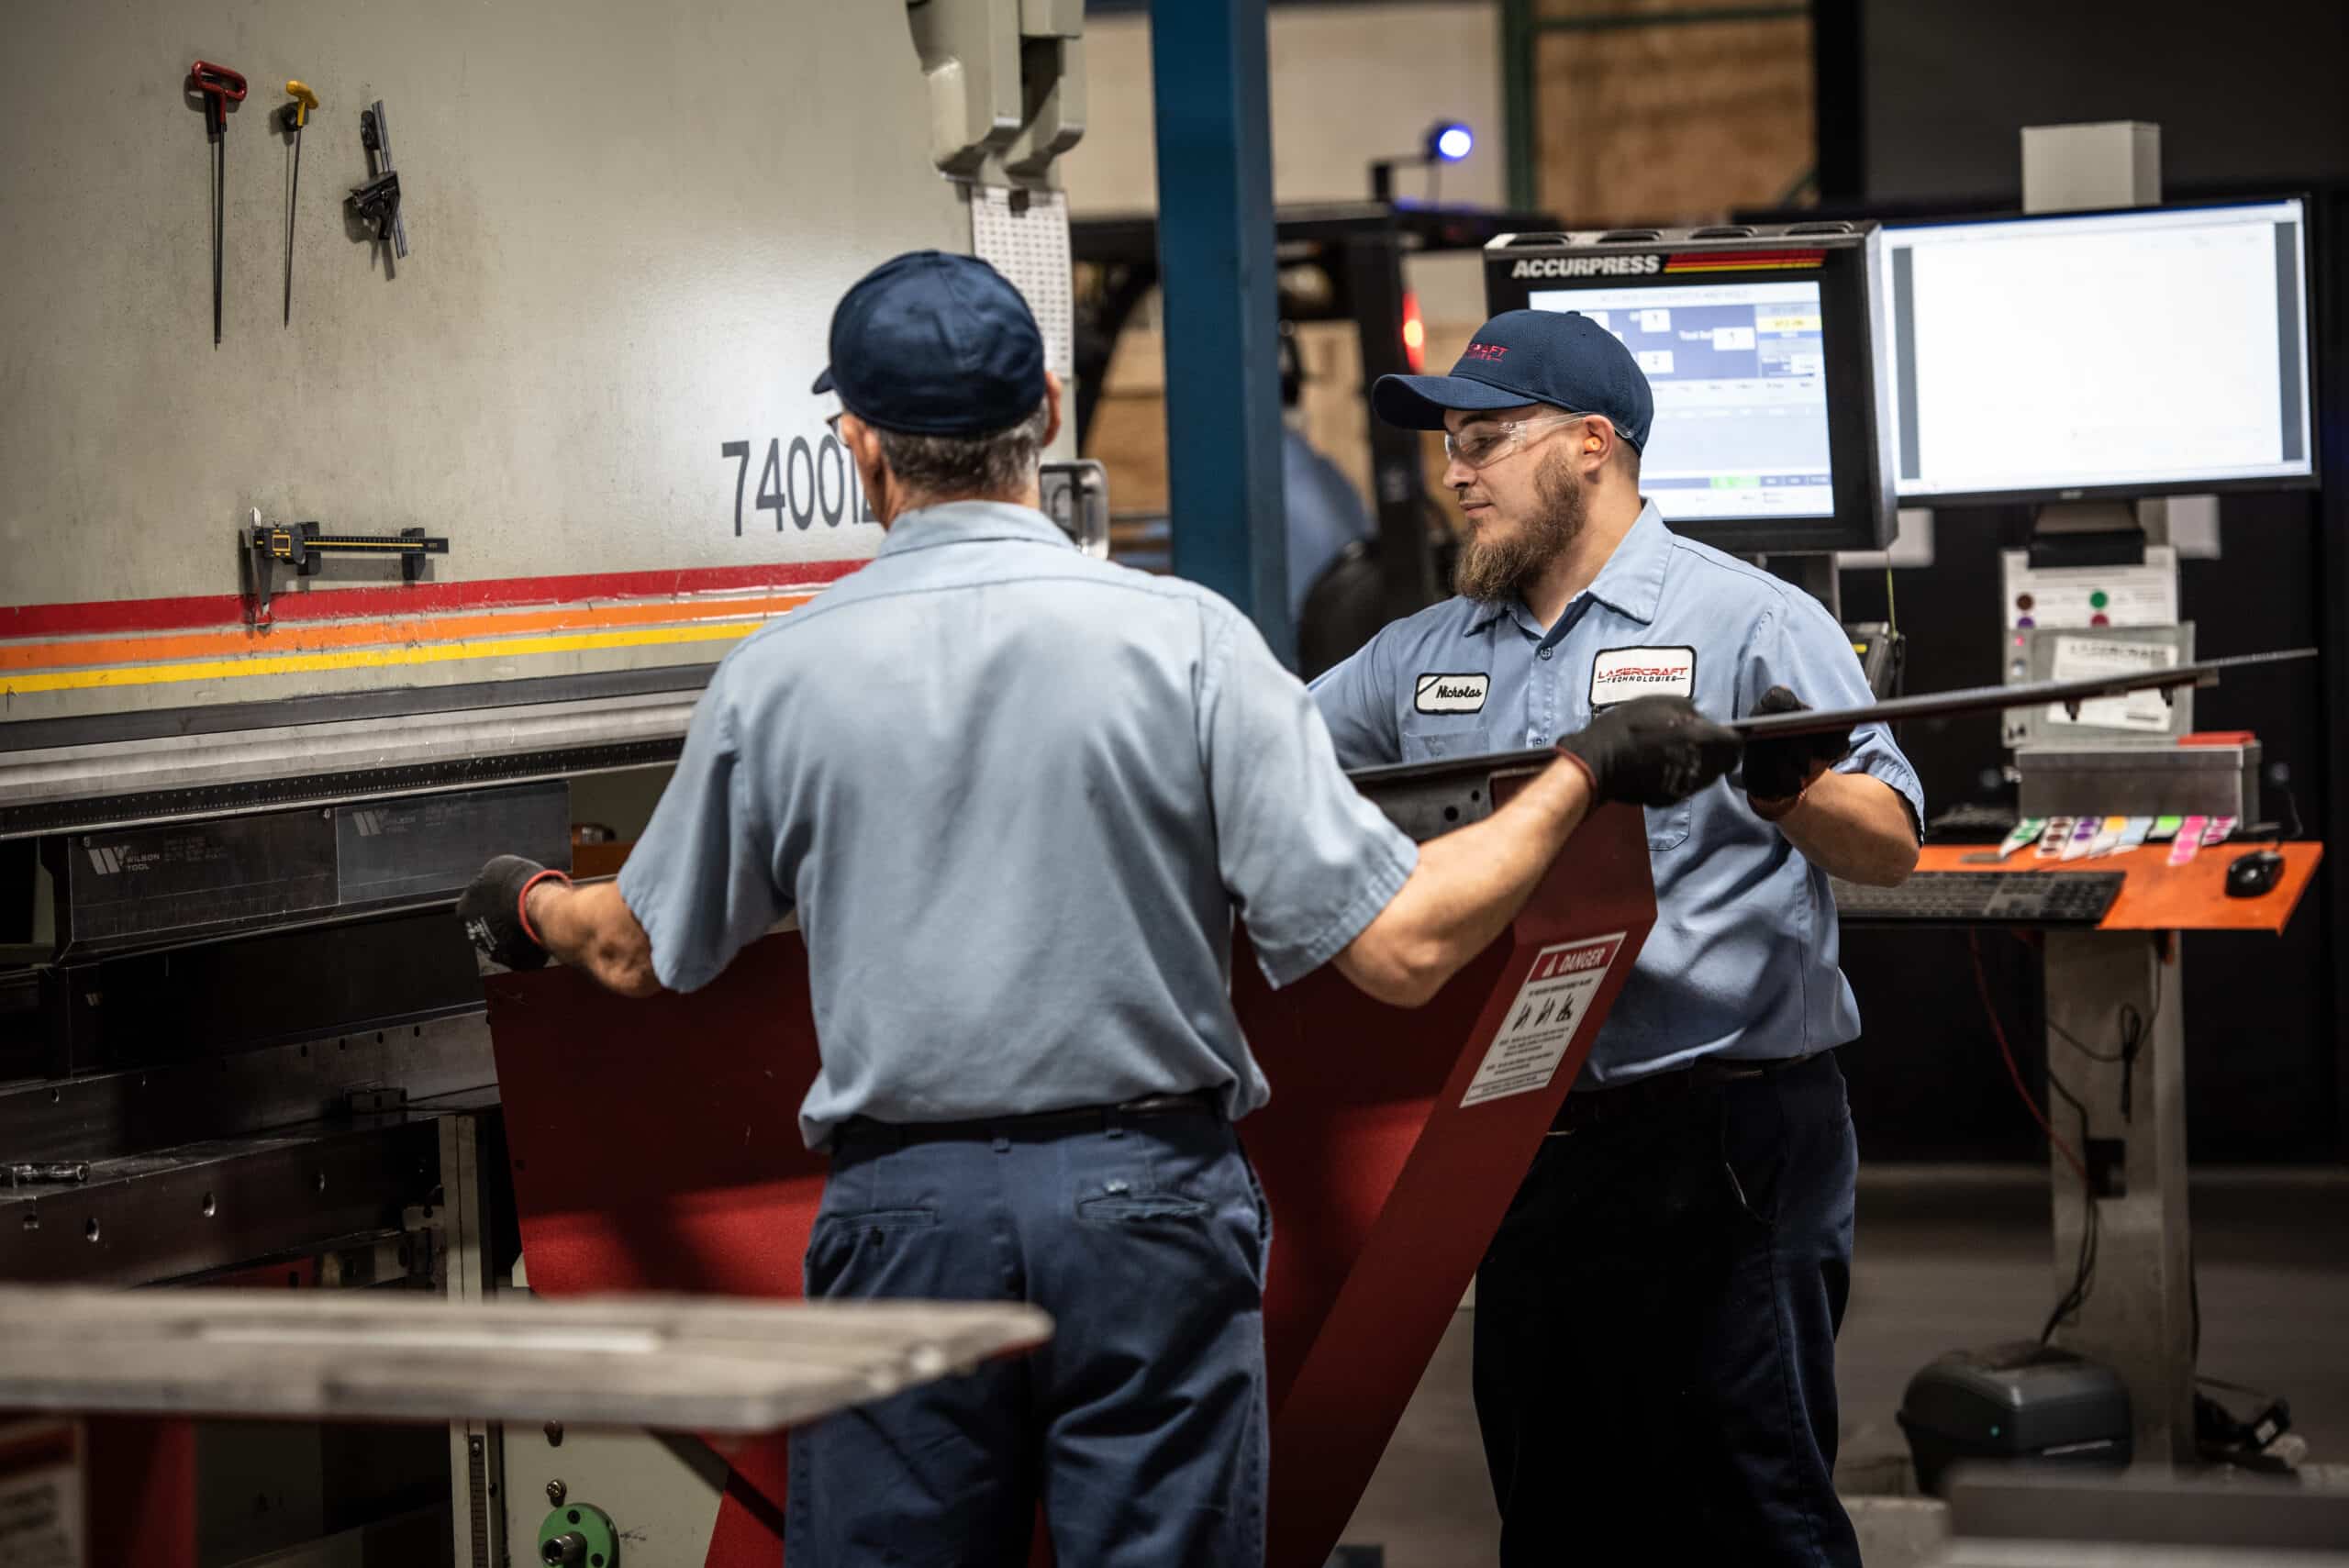 Laser Craft Tech employees load a piece of metal into a fabrication device